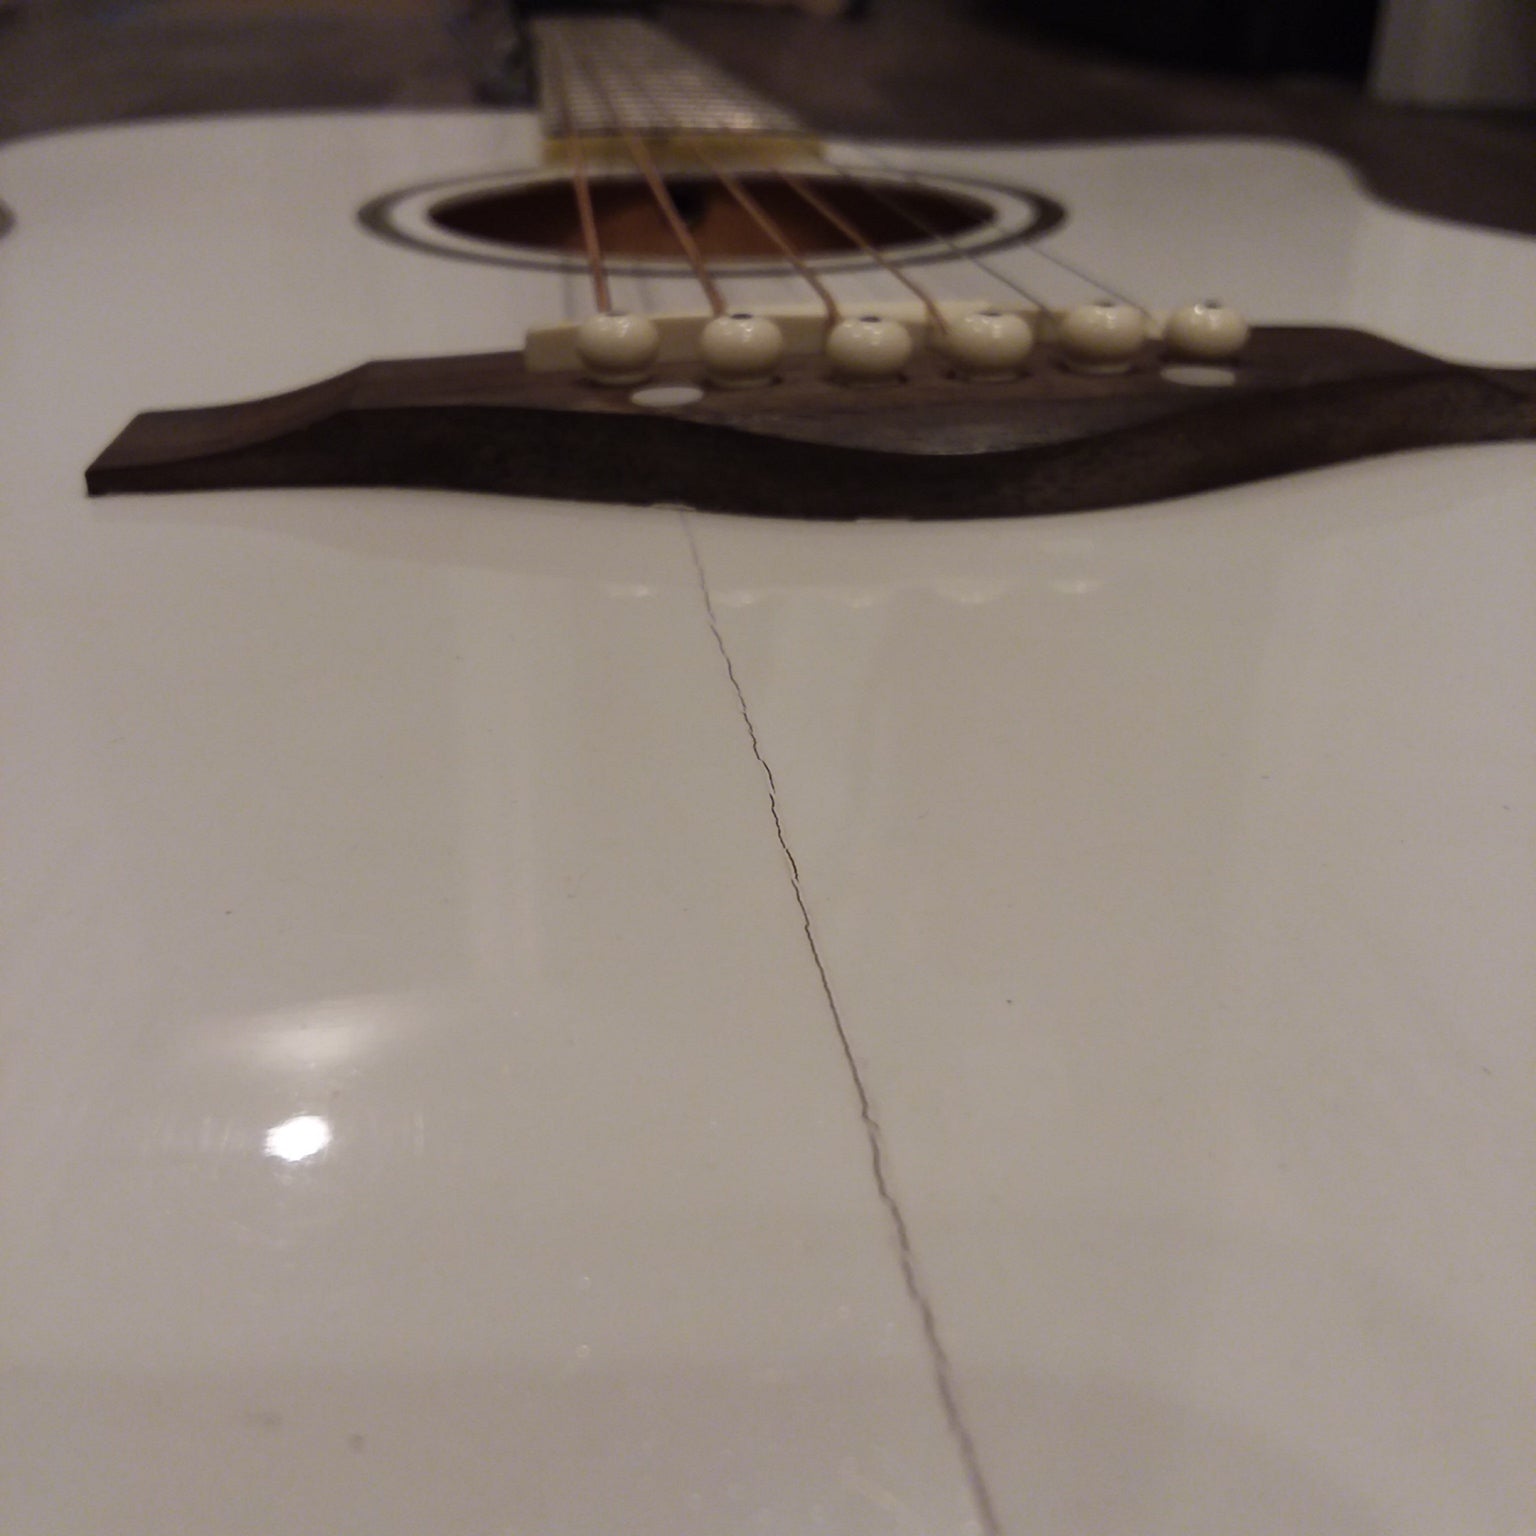 Cracked guitar from dehydration